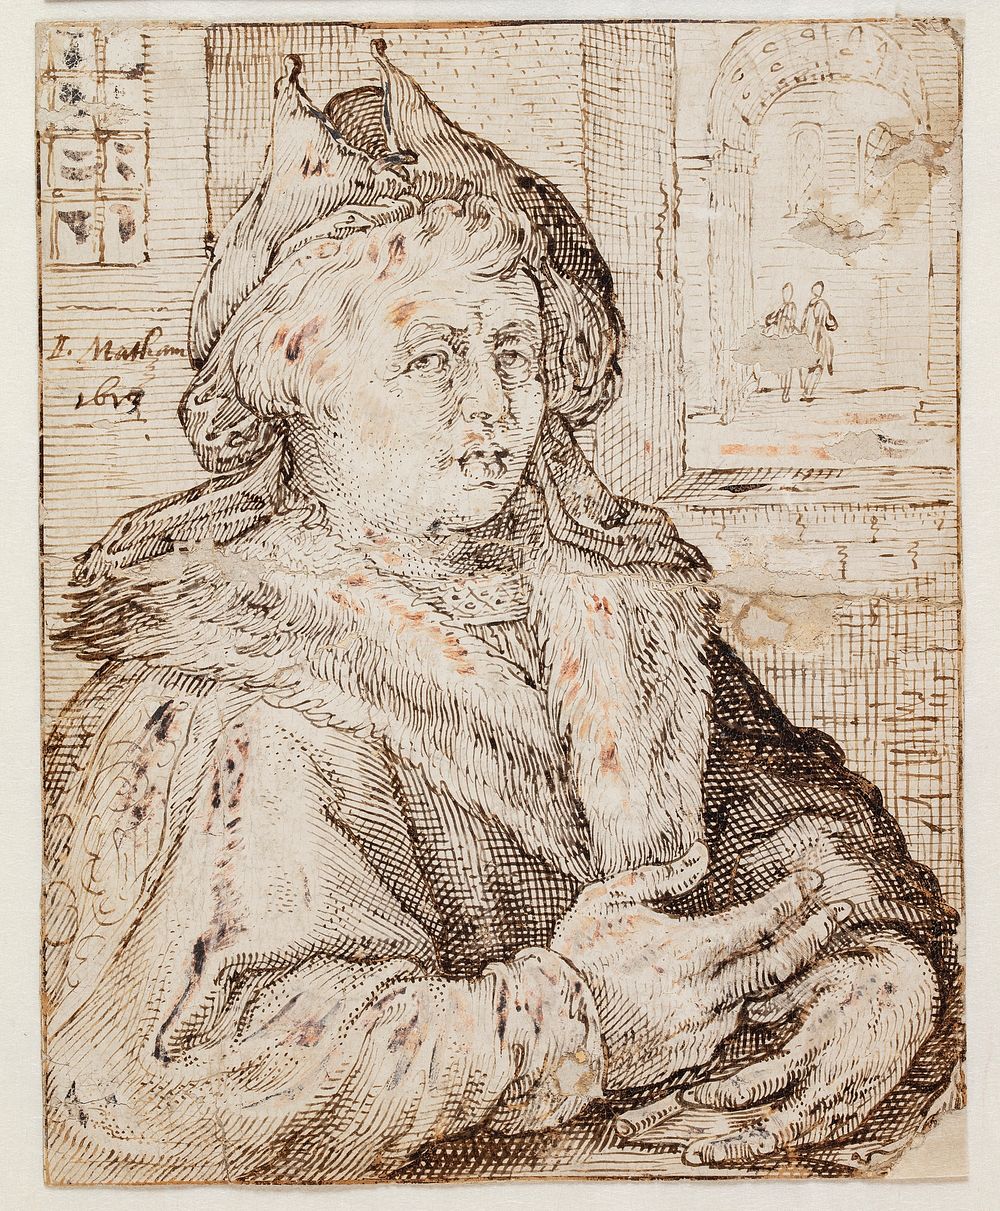 Portrait of a man with a hat and fur-brimmed cloak, facing h. T.h.through a window opening view to other rooms by Jacob…